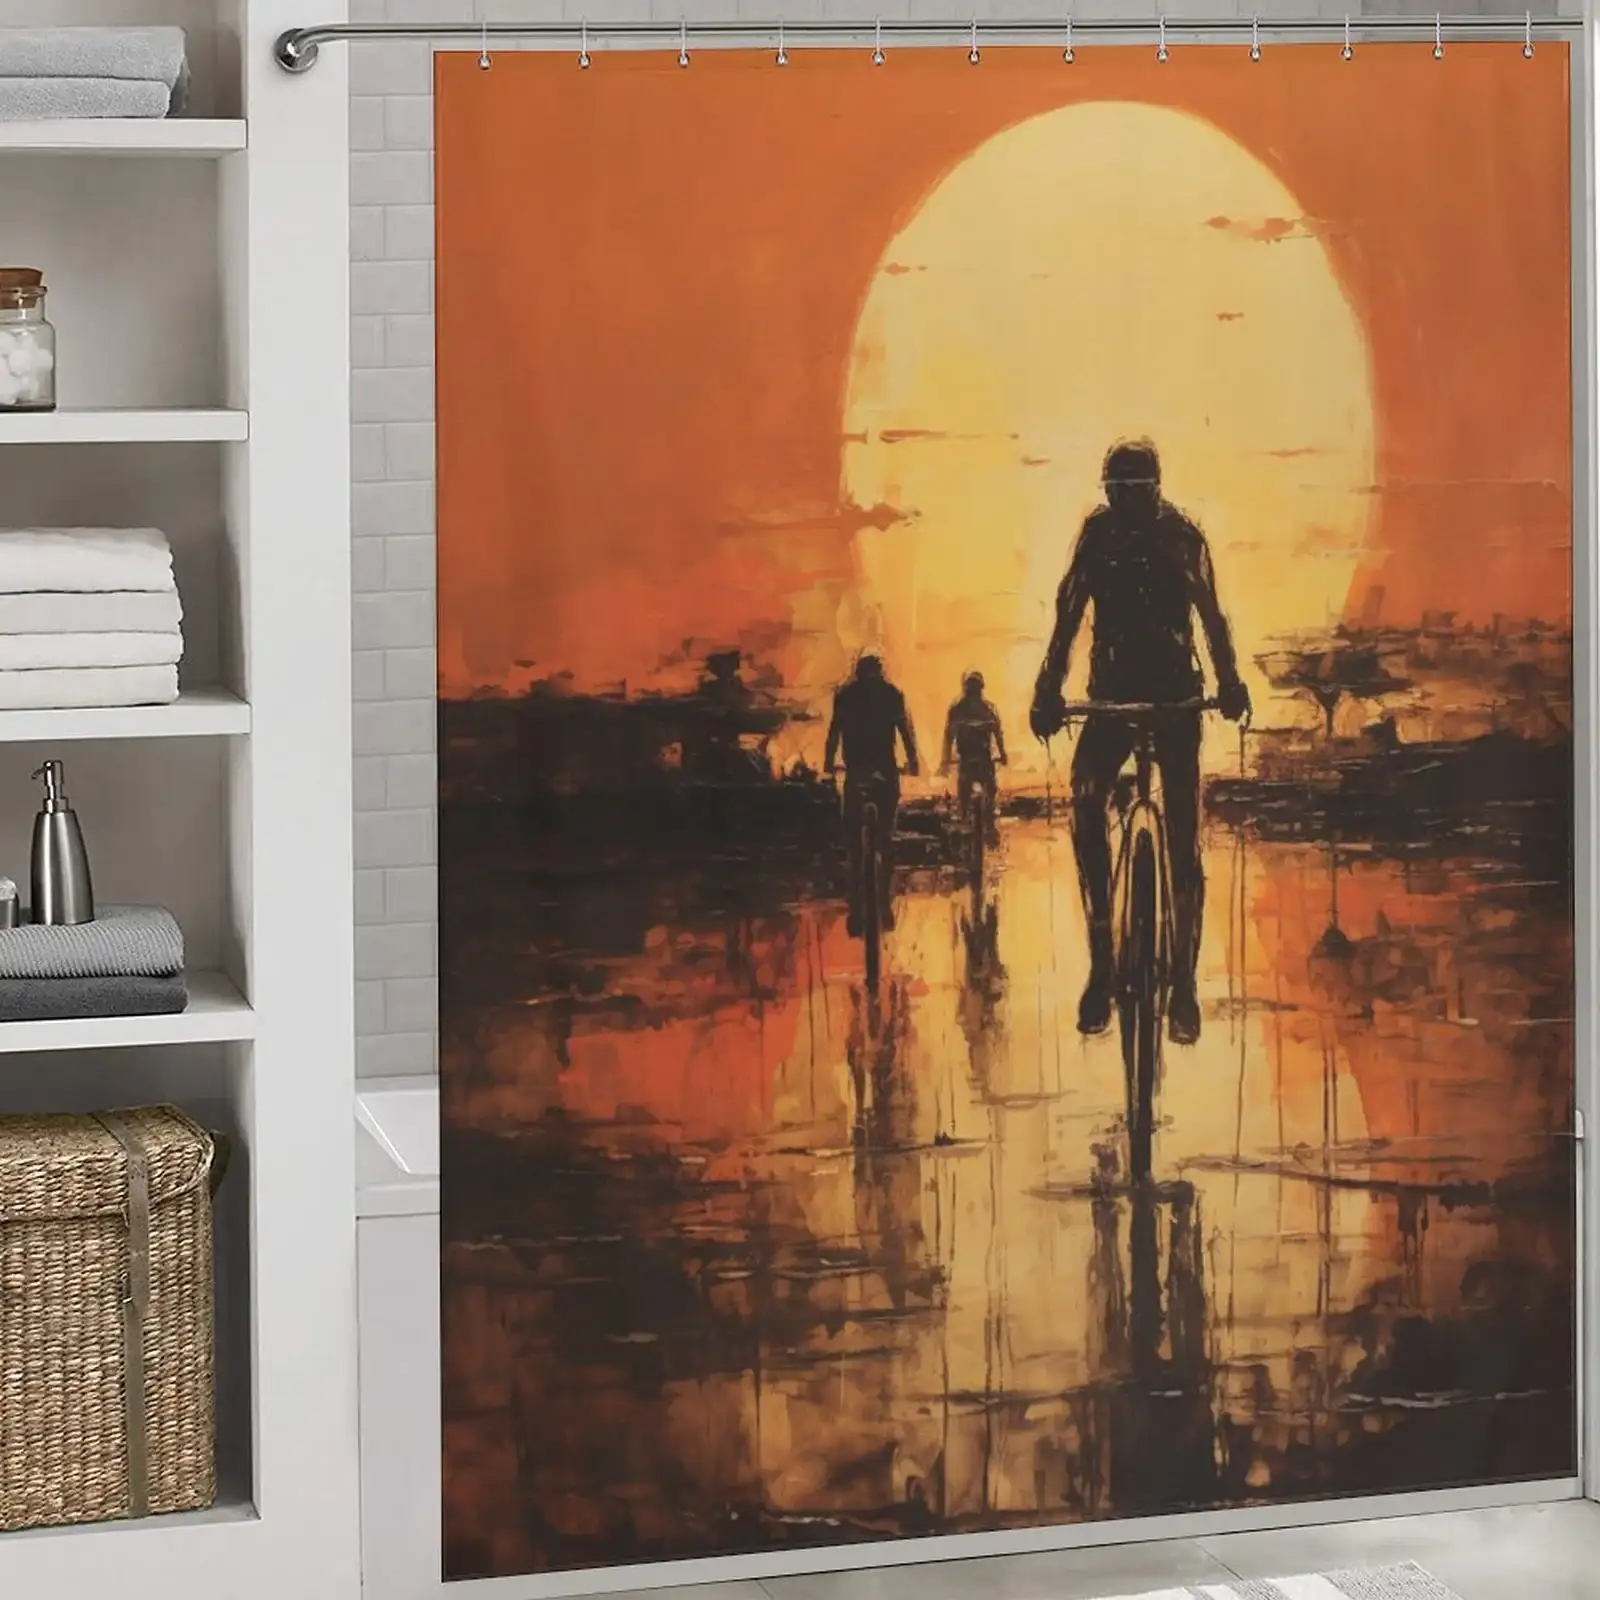 Unique Shower Curtains for Small Bathrooms: A shower curtain with a man riding a bike in the sunset.